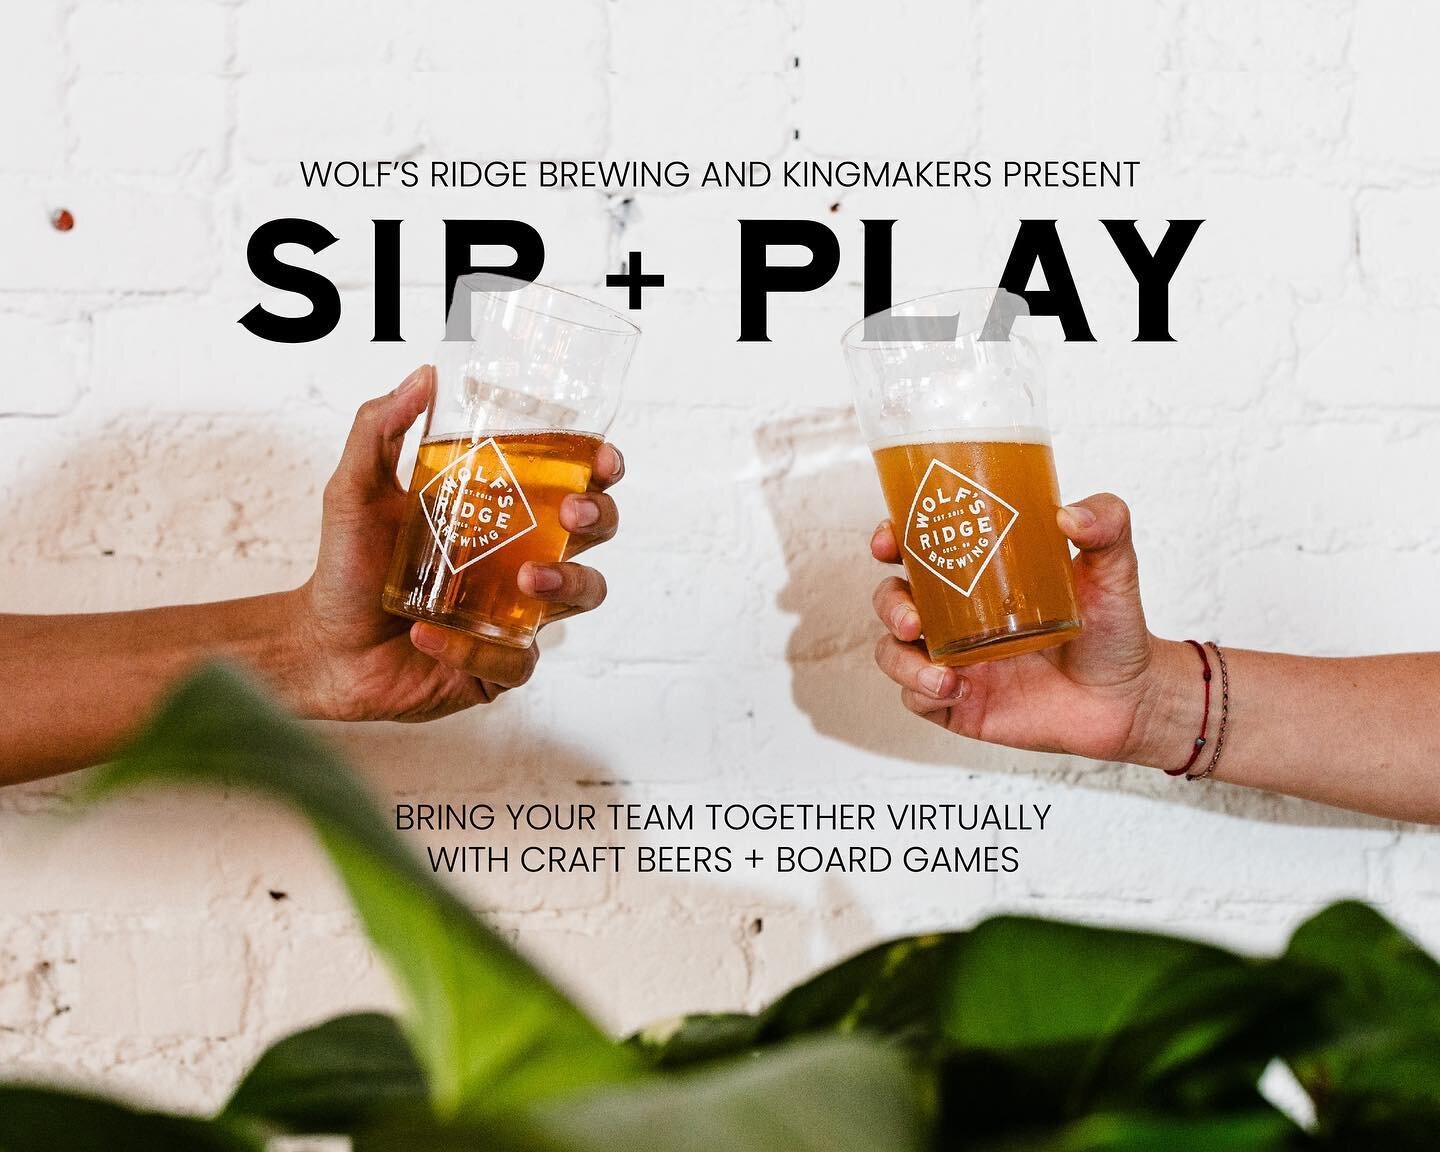 Miss having carefree fun with your coworkers after months of remote working? Sip + Play is the 2020 virtual event you&rsquo;ve been waiting for!&nbsp;&nbsp;We teamed up with @kingmakersfun for an epic collab experience that combines our mutual love o